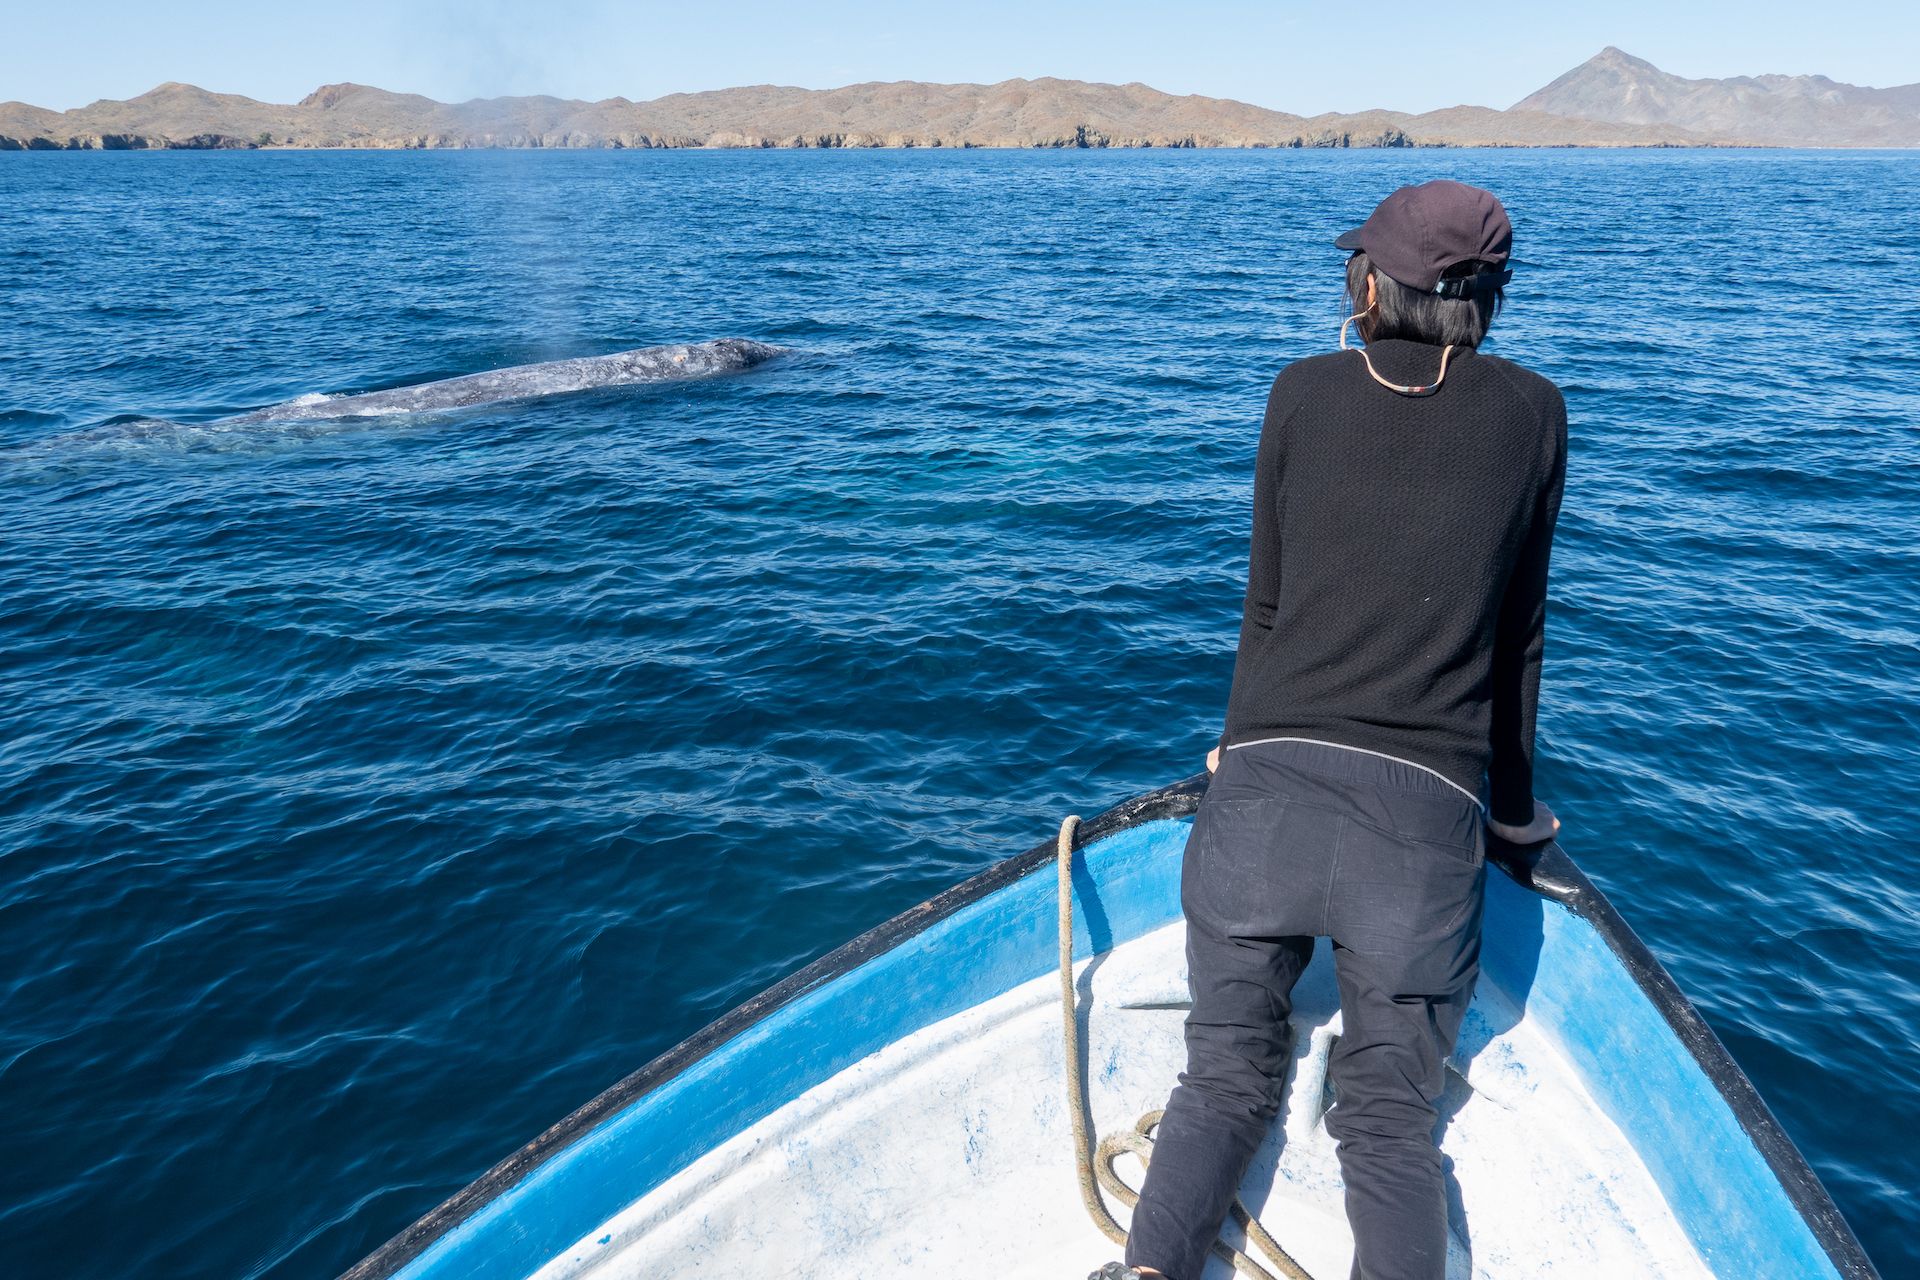 Kuan looking at a friendly whale